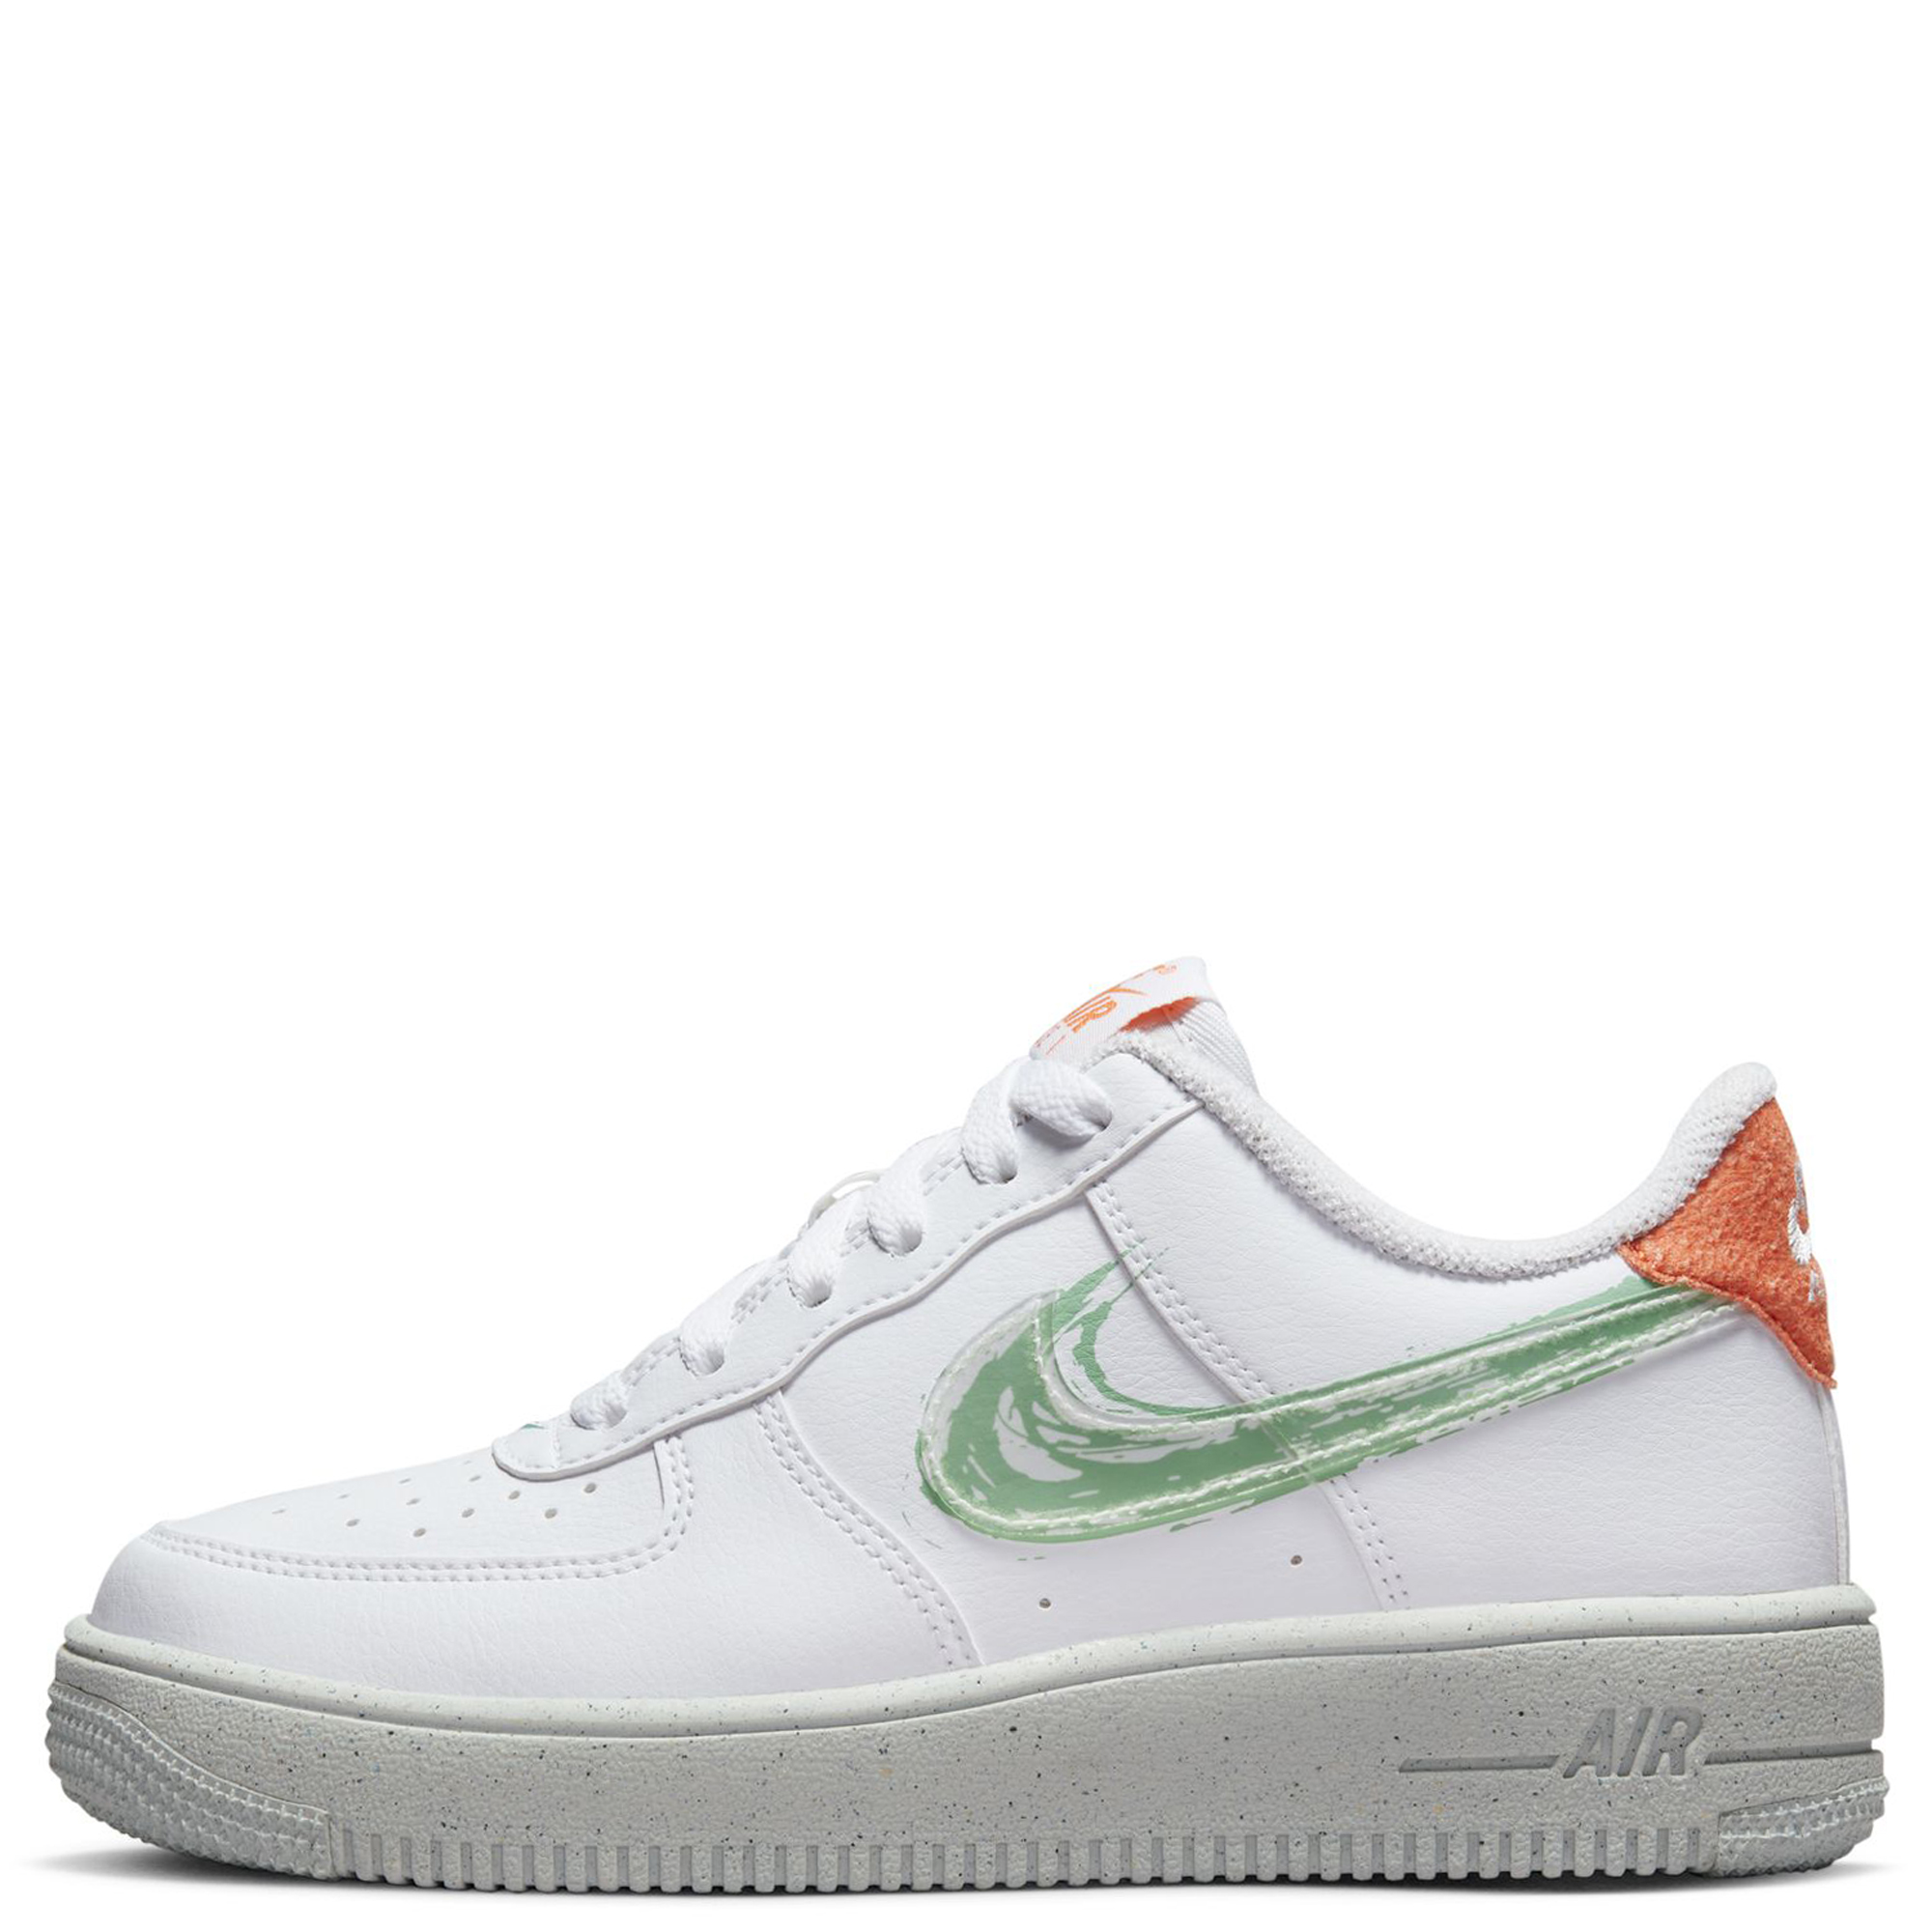 Senior citizens Unavoidable mode NIKE (GS) Air Force 1 Crater DX3067 100 - Shiekh